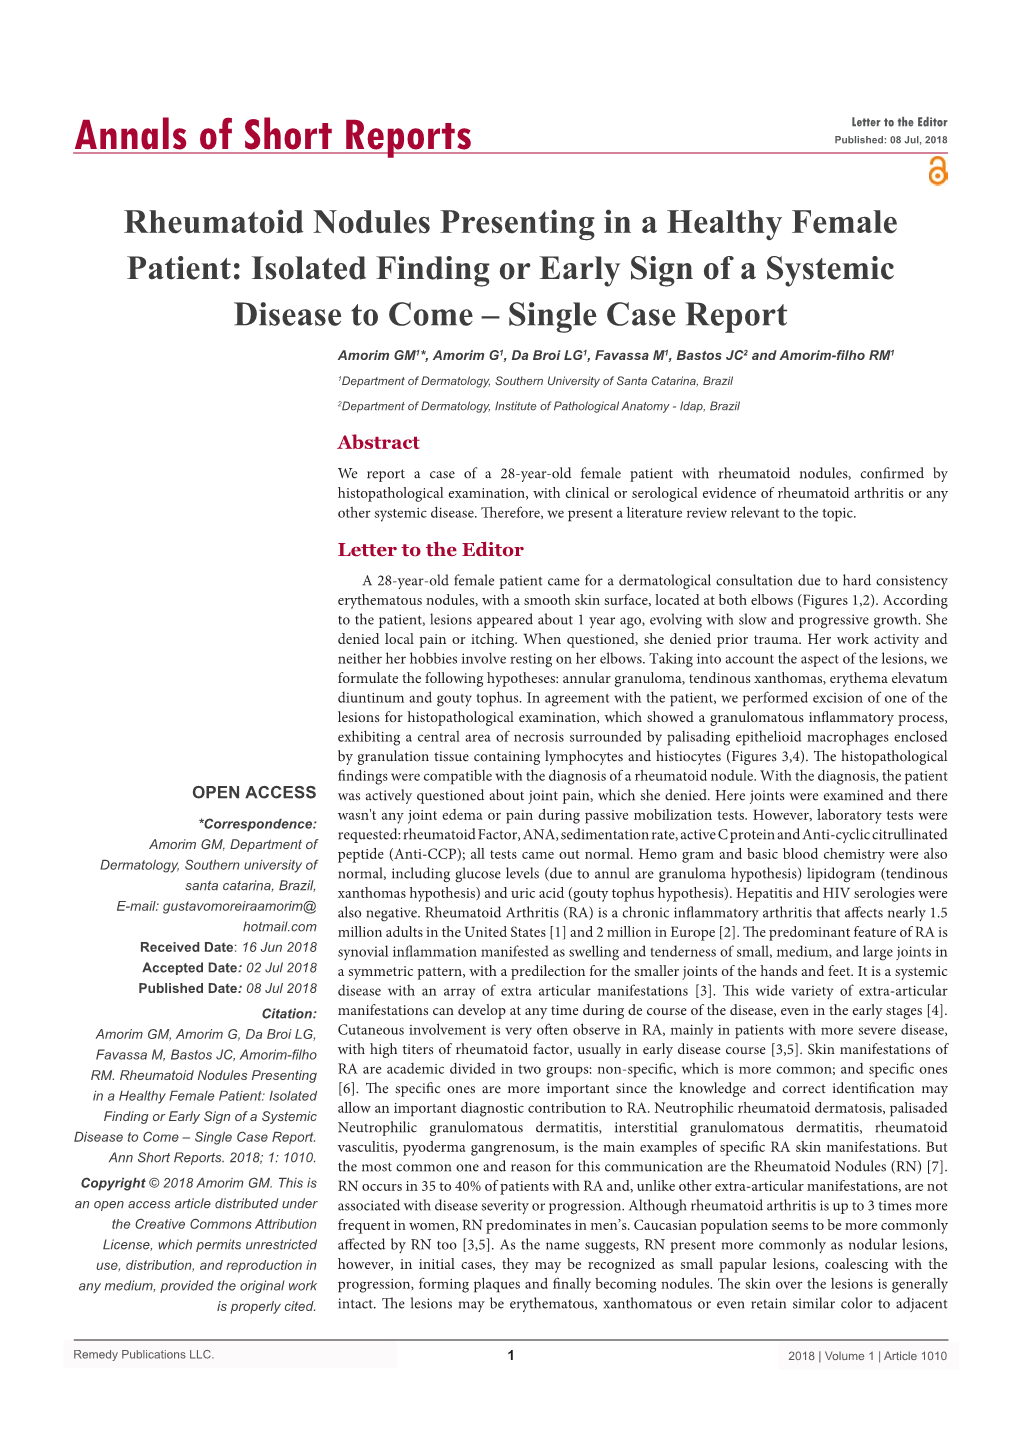 Rheumatoid Nodules Presenting in a Healthy Female Patient: Isolated Finding Or Early Sign of a Systemic Disease to Come – Single Case Report